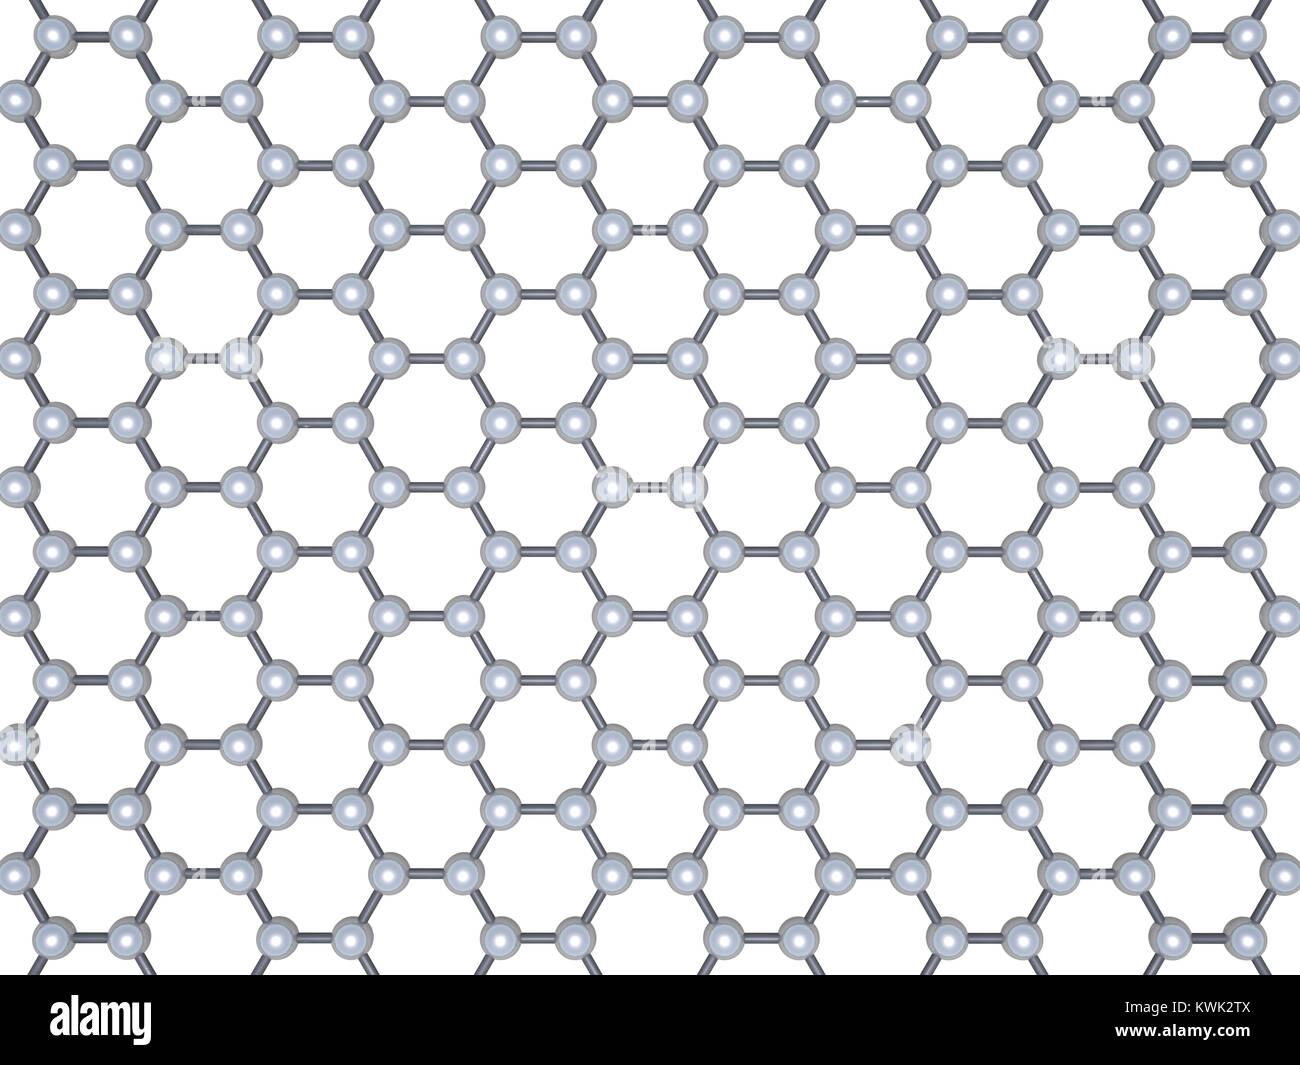 Graphene layer, top view. Hexagonal lattice of carbon atoms isolated on white background, 3d illustration Stock Photo